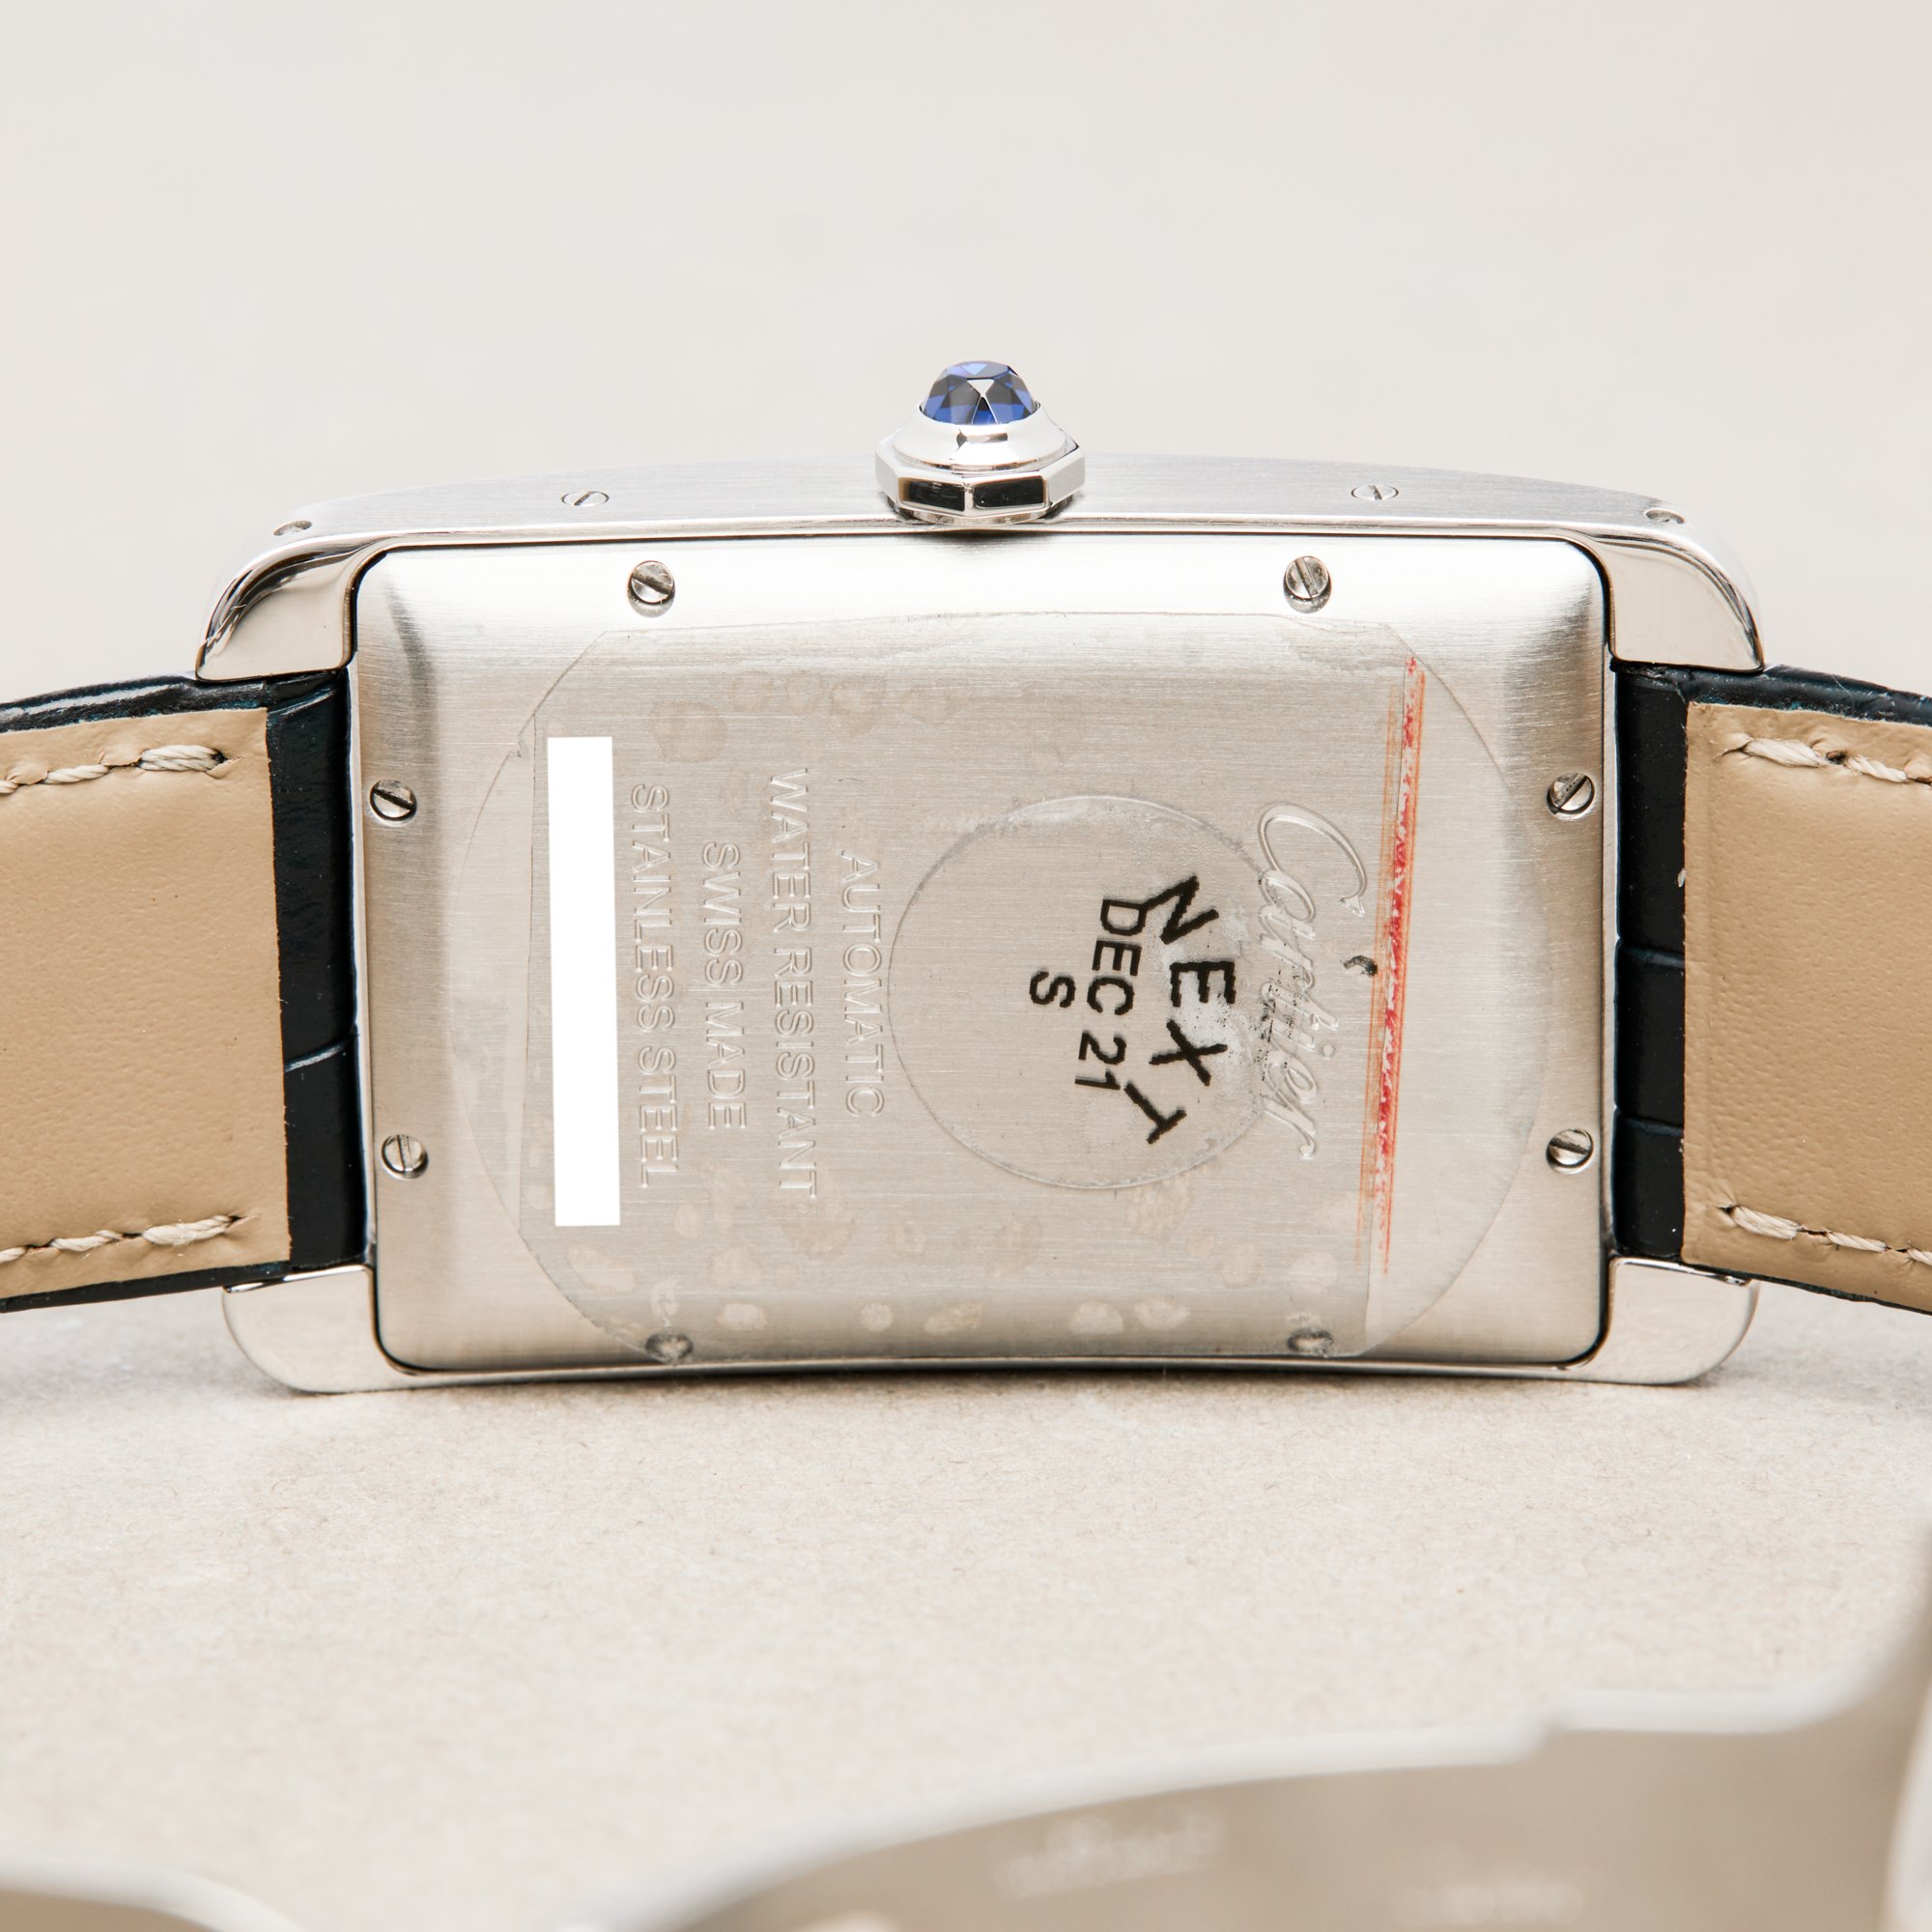 Cartier Tank Americaine Stainless Steel WSTA0018 or 3972